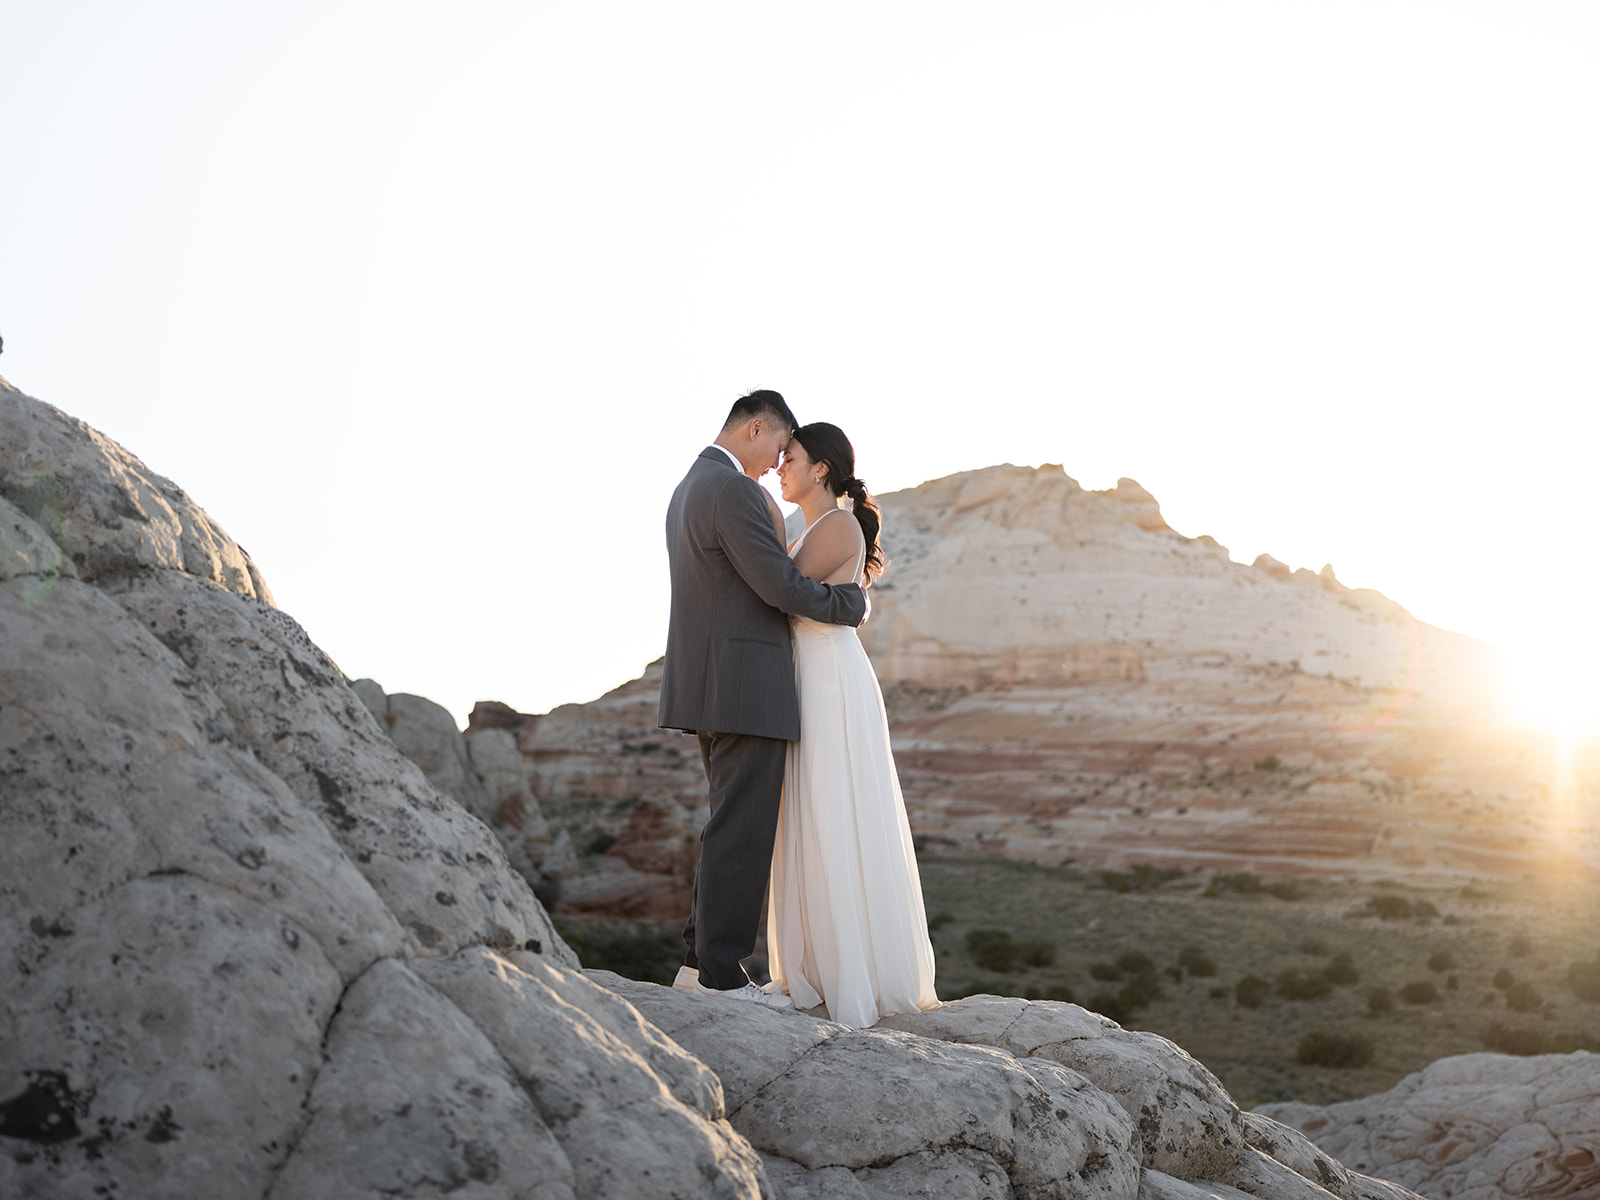 Couple exchanging vows at sunset during their elopement in the unique and otherworldly landscape of White Pocket